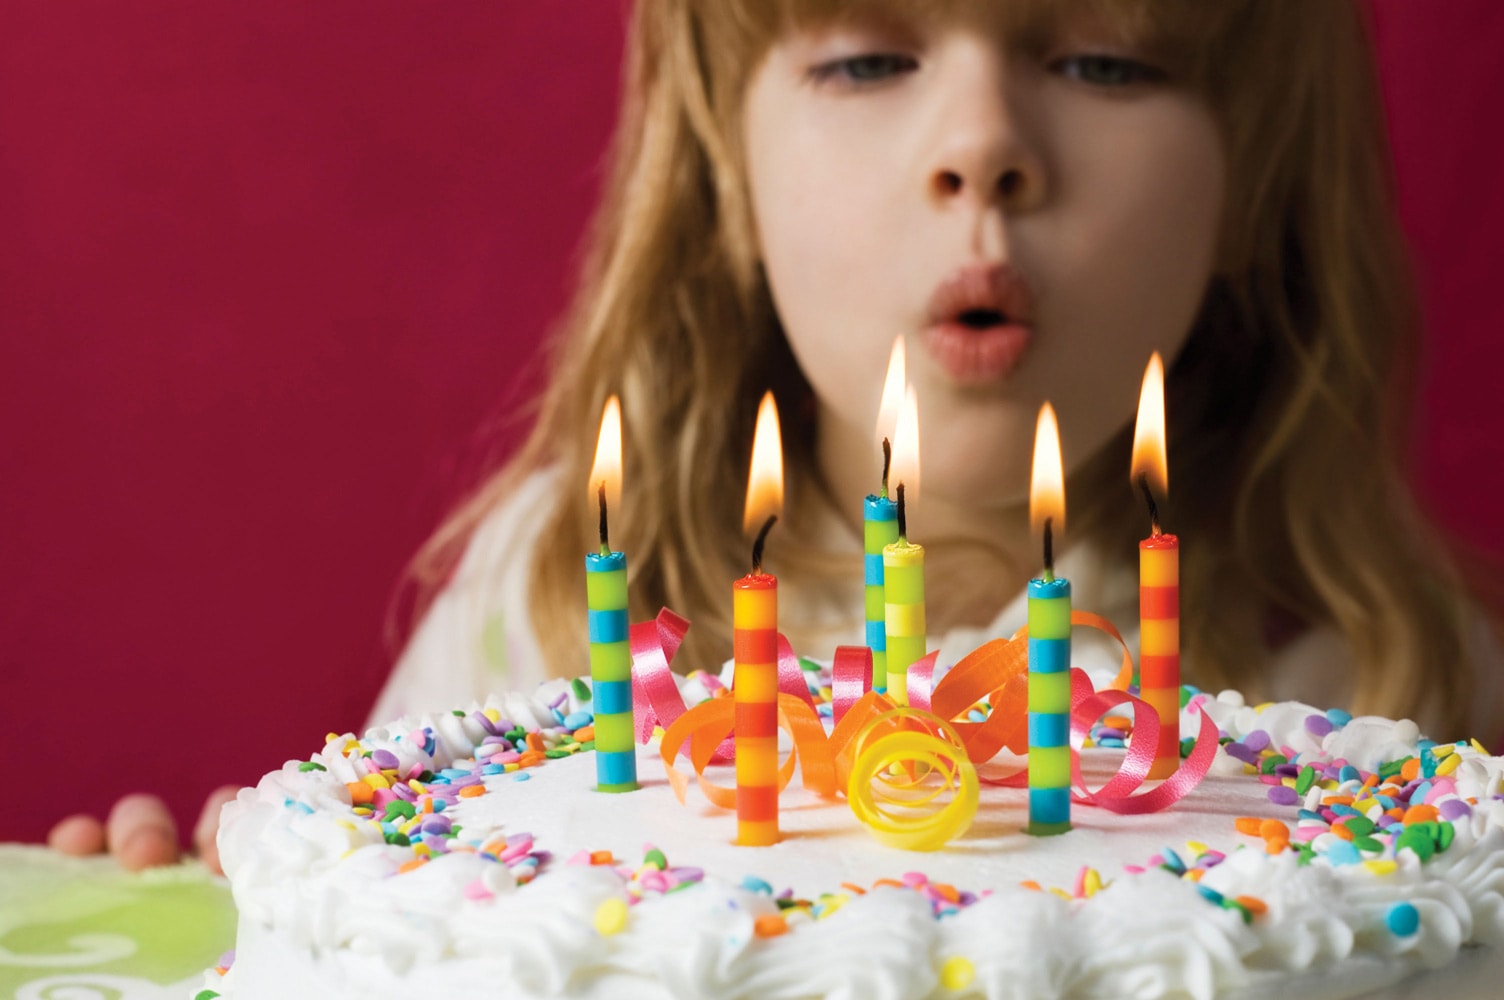 A child blows out birthday candles on a cake